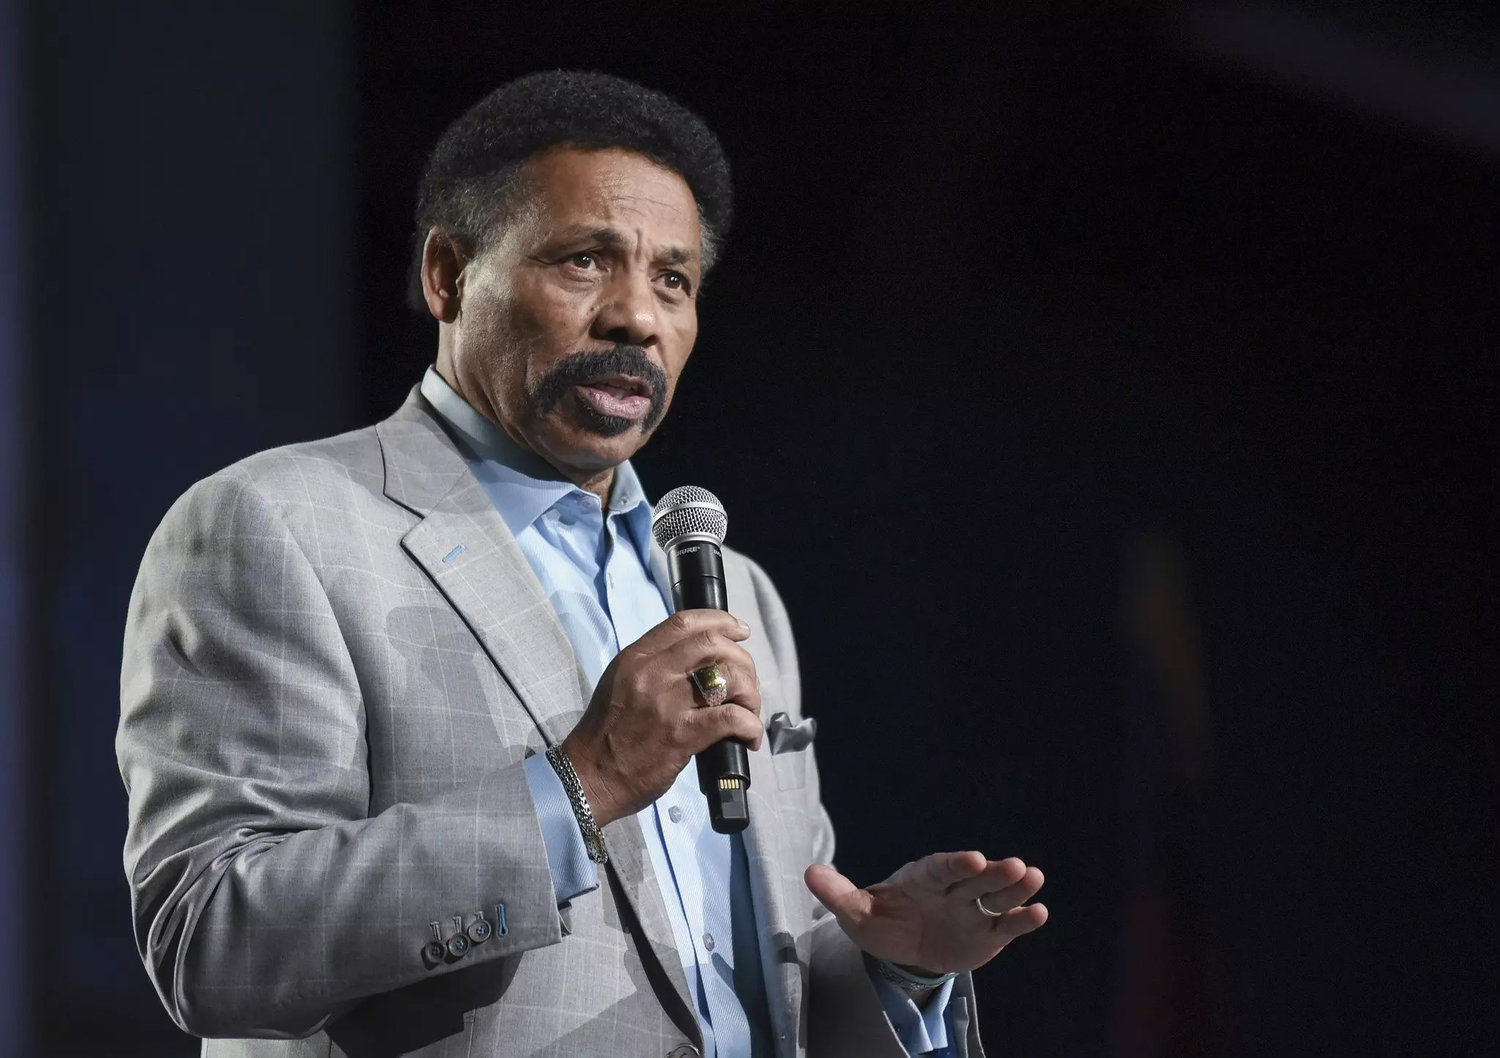 Pastor and author Tony Evans will be among the speakers at the Georgia Baptist Convention's annual meeting in Augusta in November.. (Baptist Press/Karen McCutcheon)